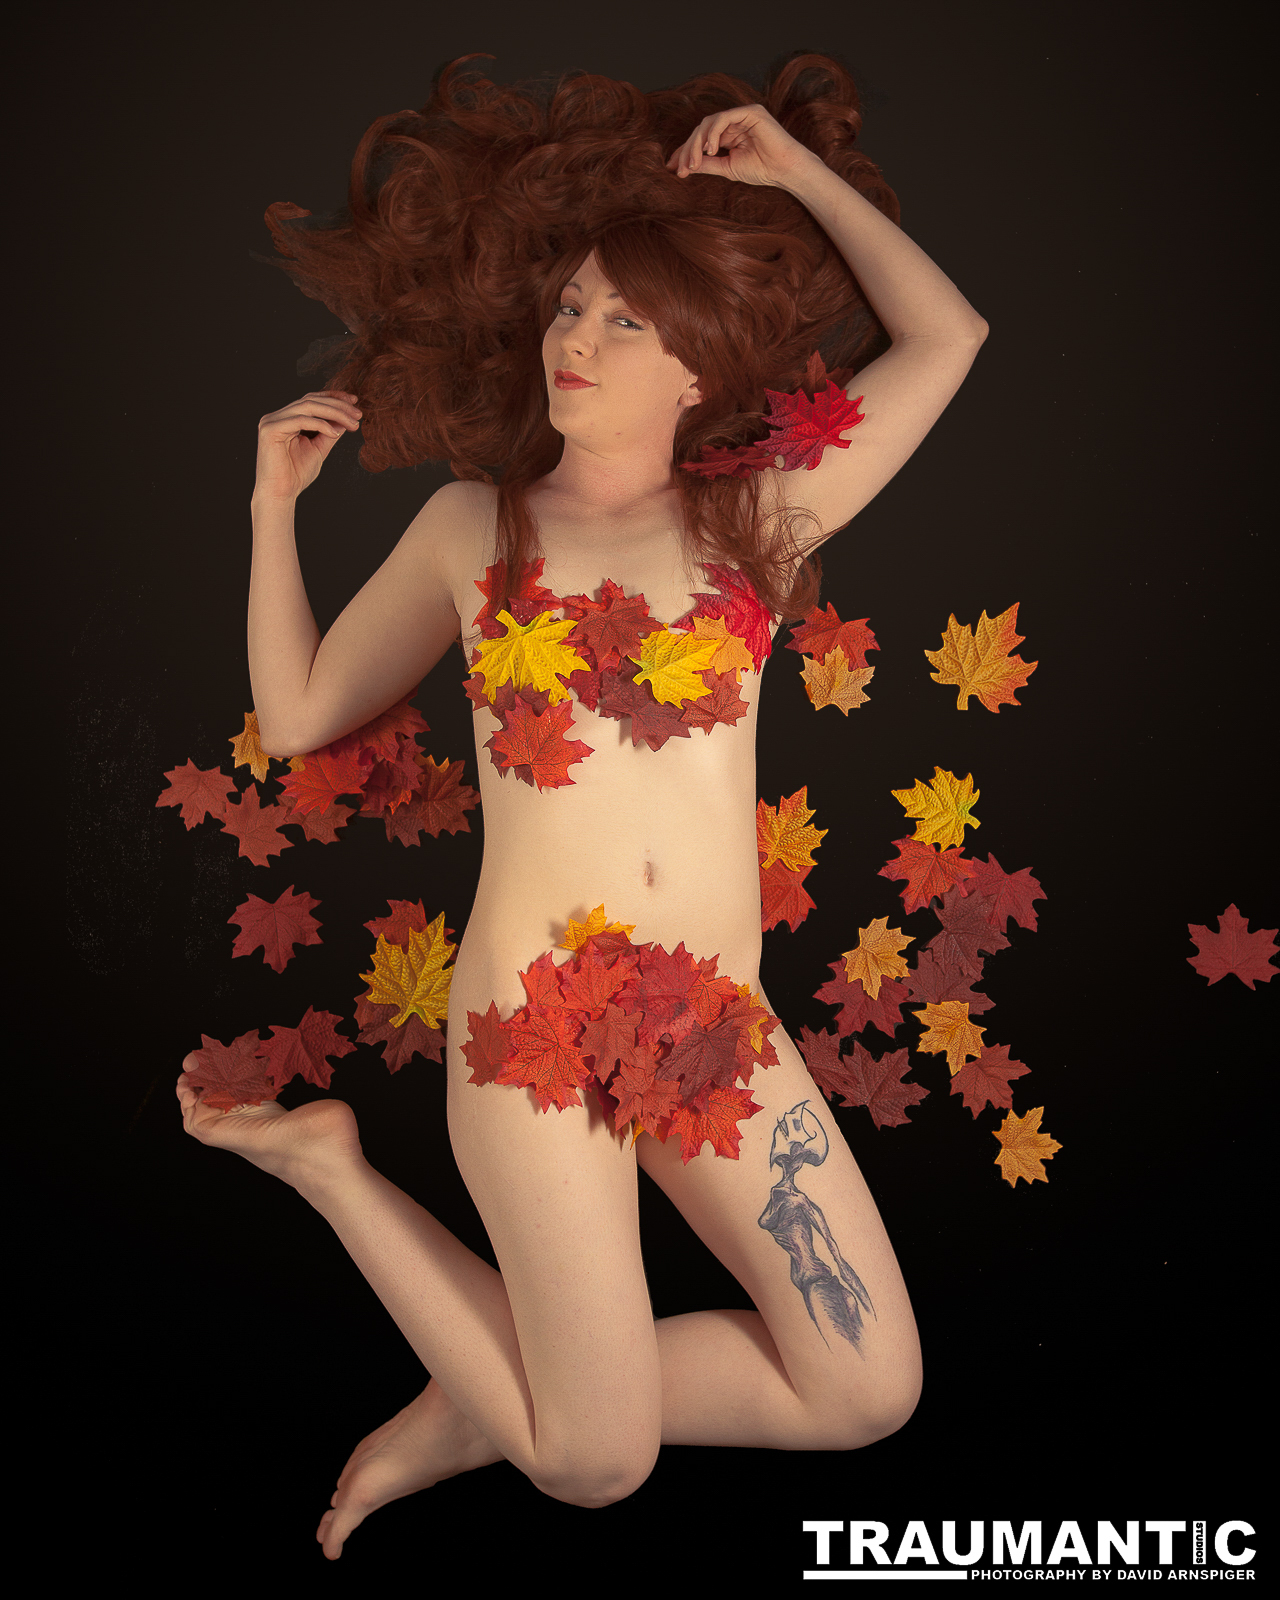 This was an idea I had for a pinup calendar.  I wanted to digitally insert a bed of leaves behind her.  I liked the way the image came out with the minimal number of leaves.